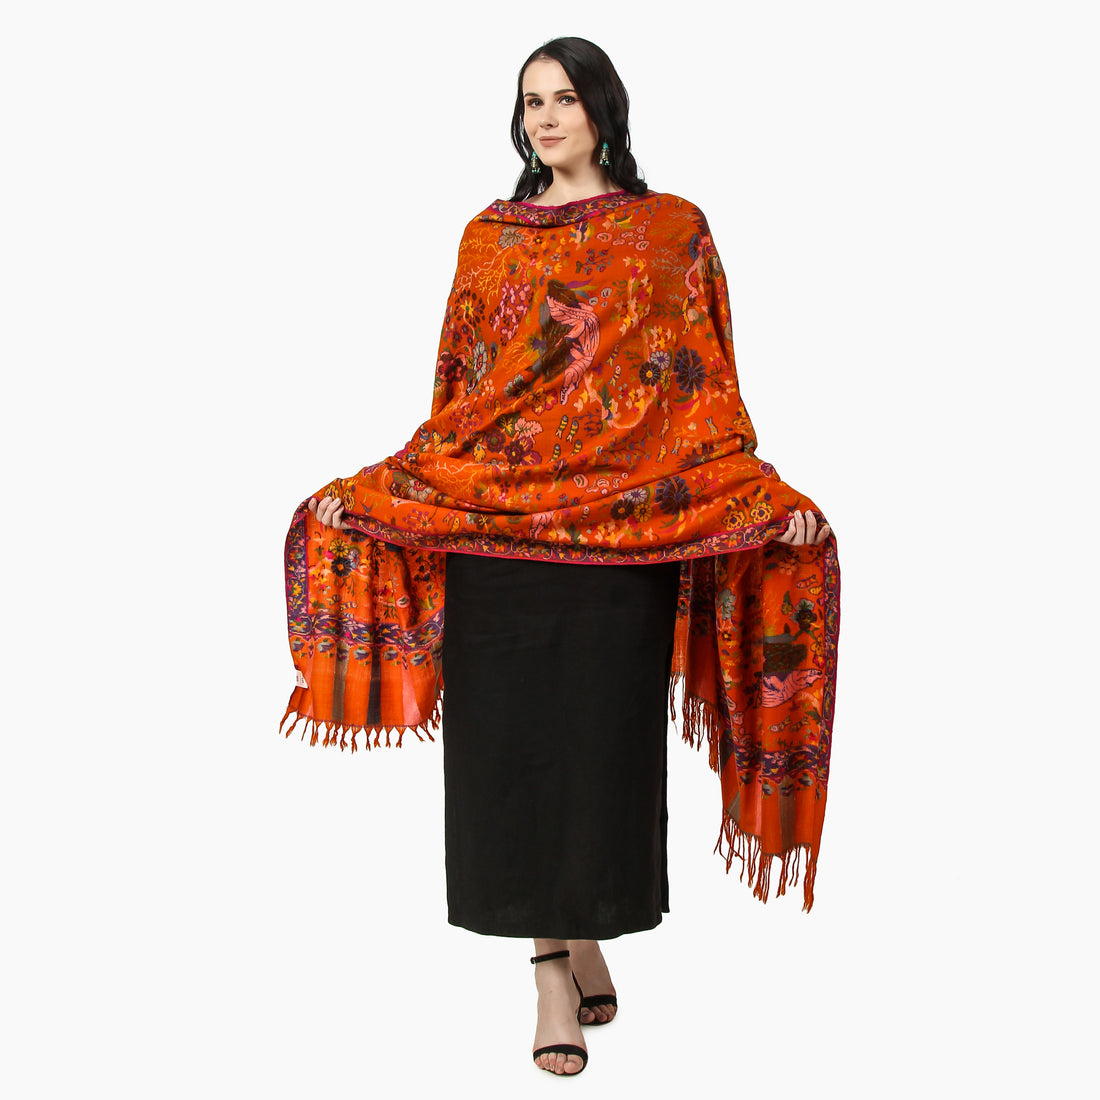 Where do pashmina shawls come from?